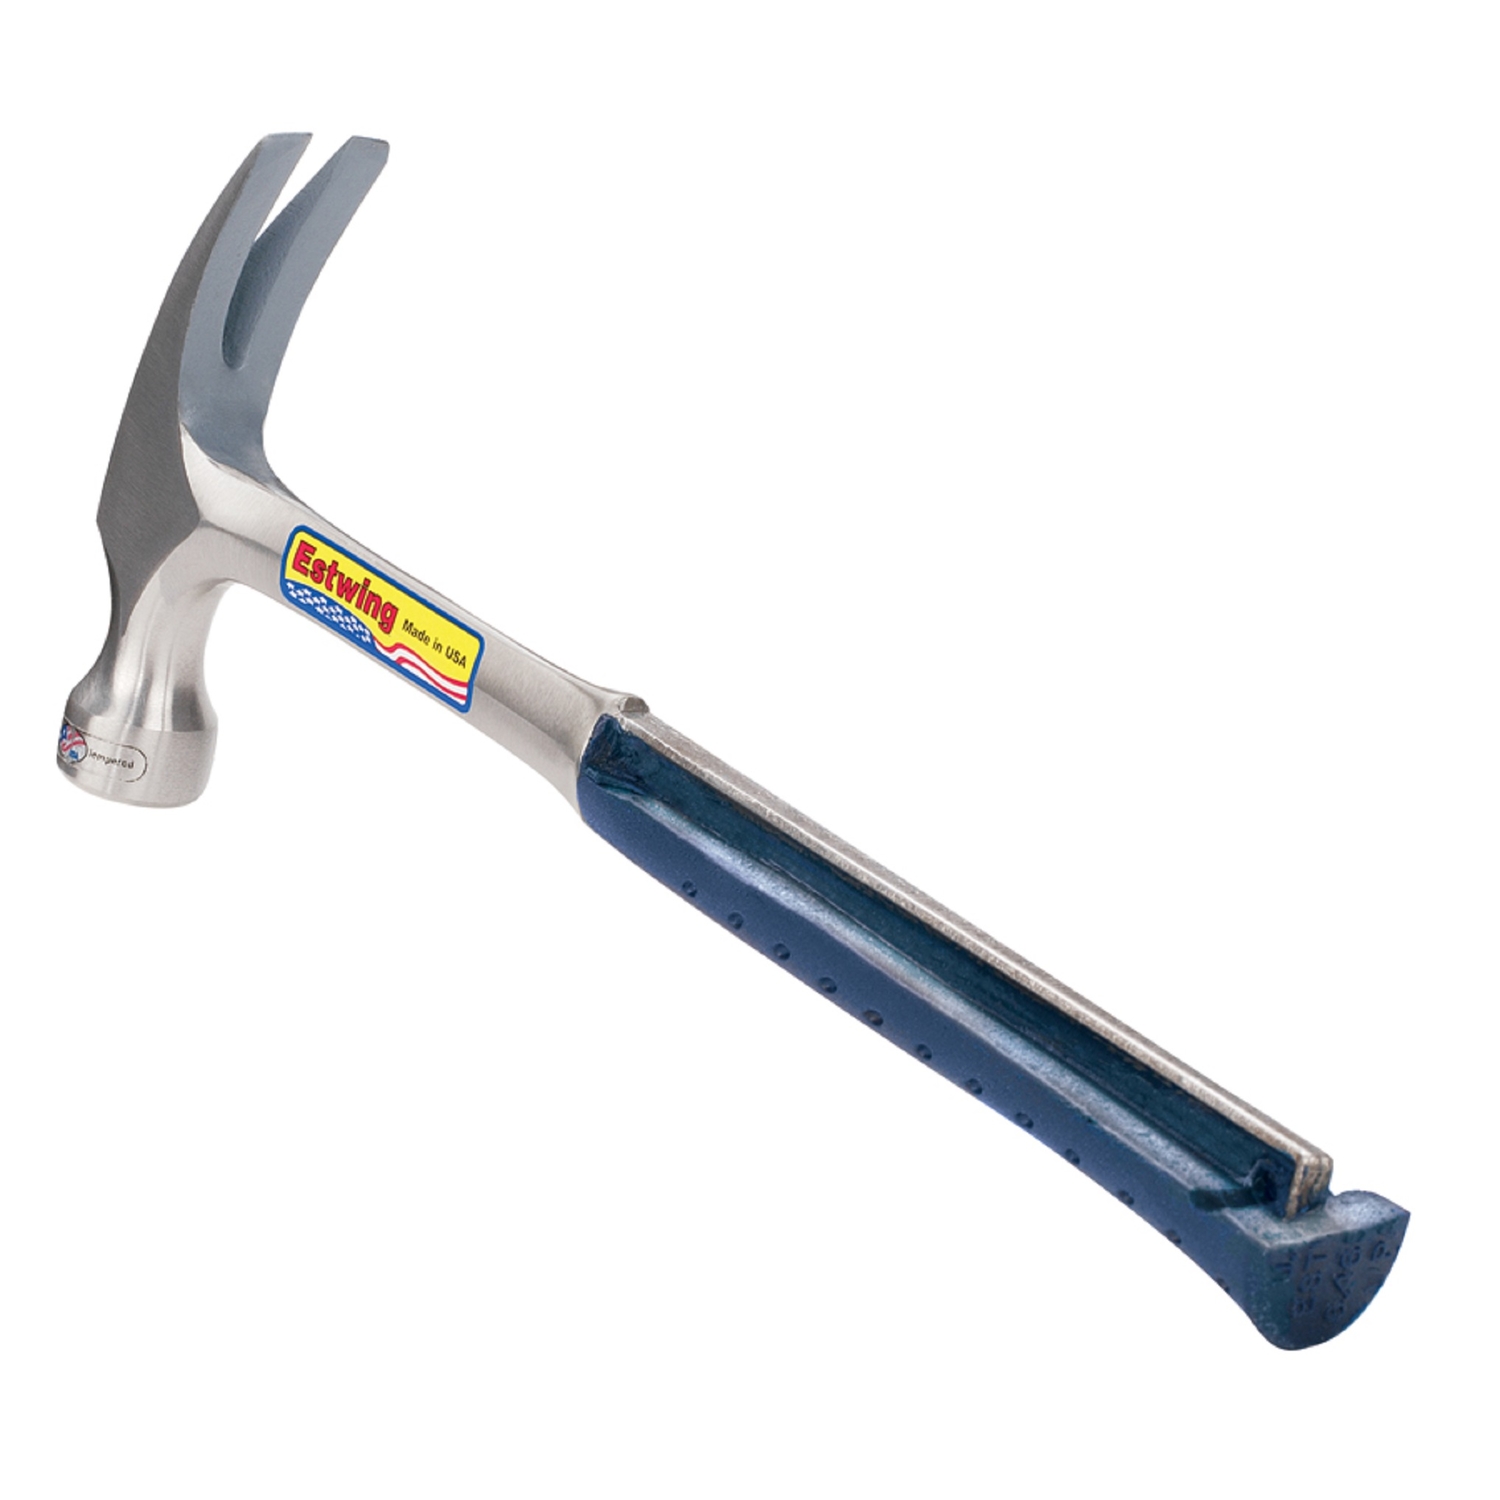 Estwing 22 oz Smooth Face Framing Hammer Steel Handle